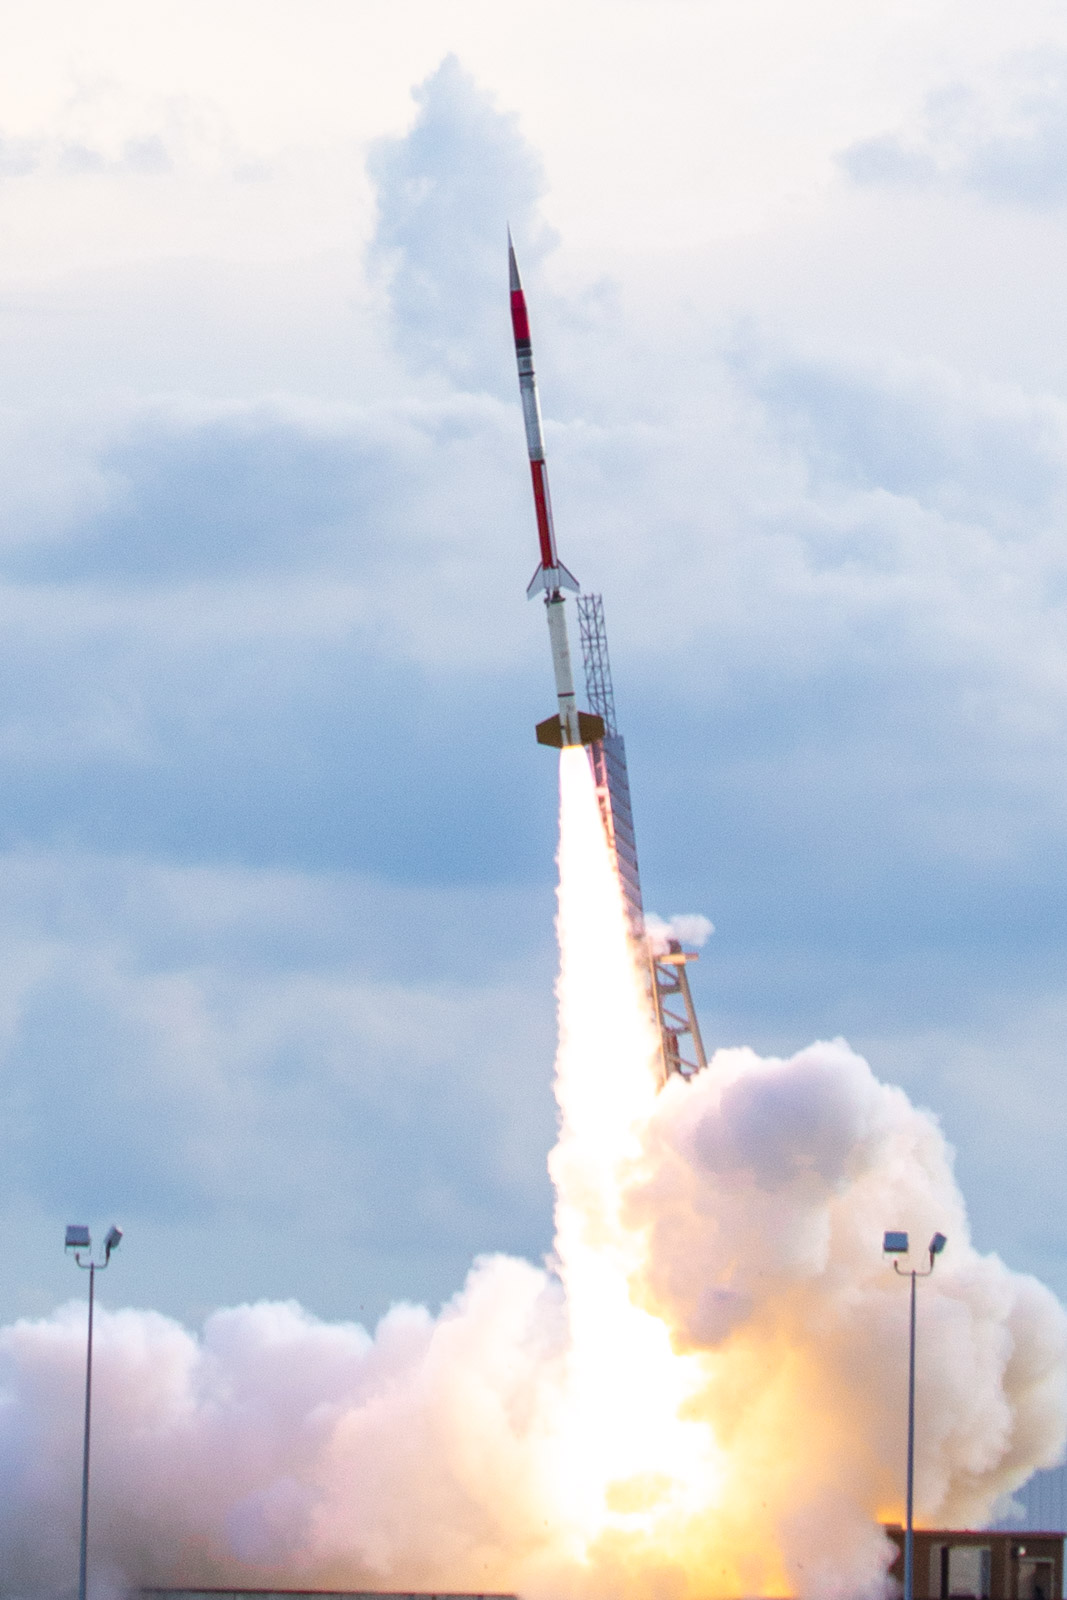 A red and silver small rocket in flight, launching just off its launch pad with a plume of fire and smoke underneath.